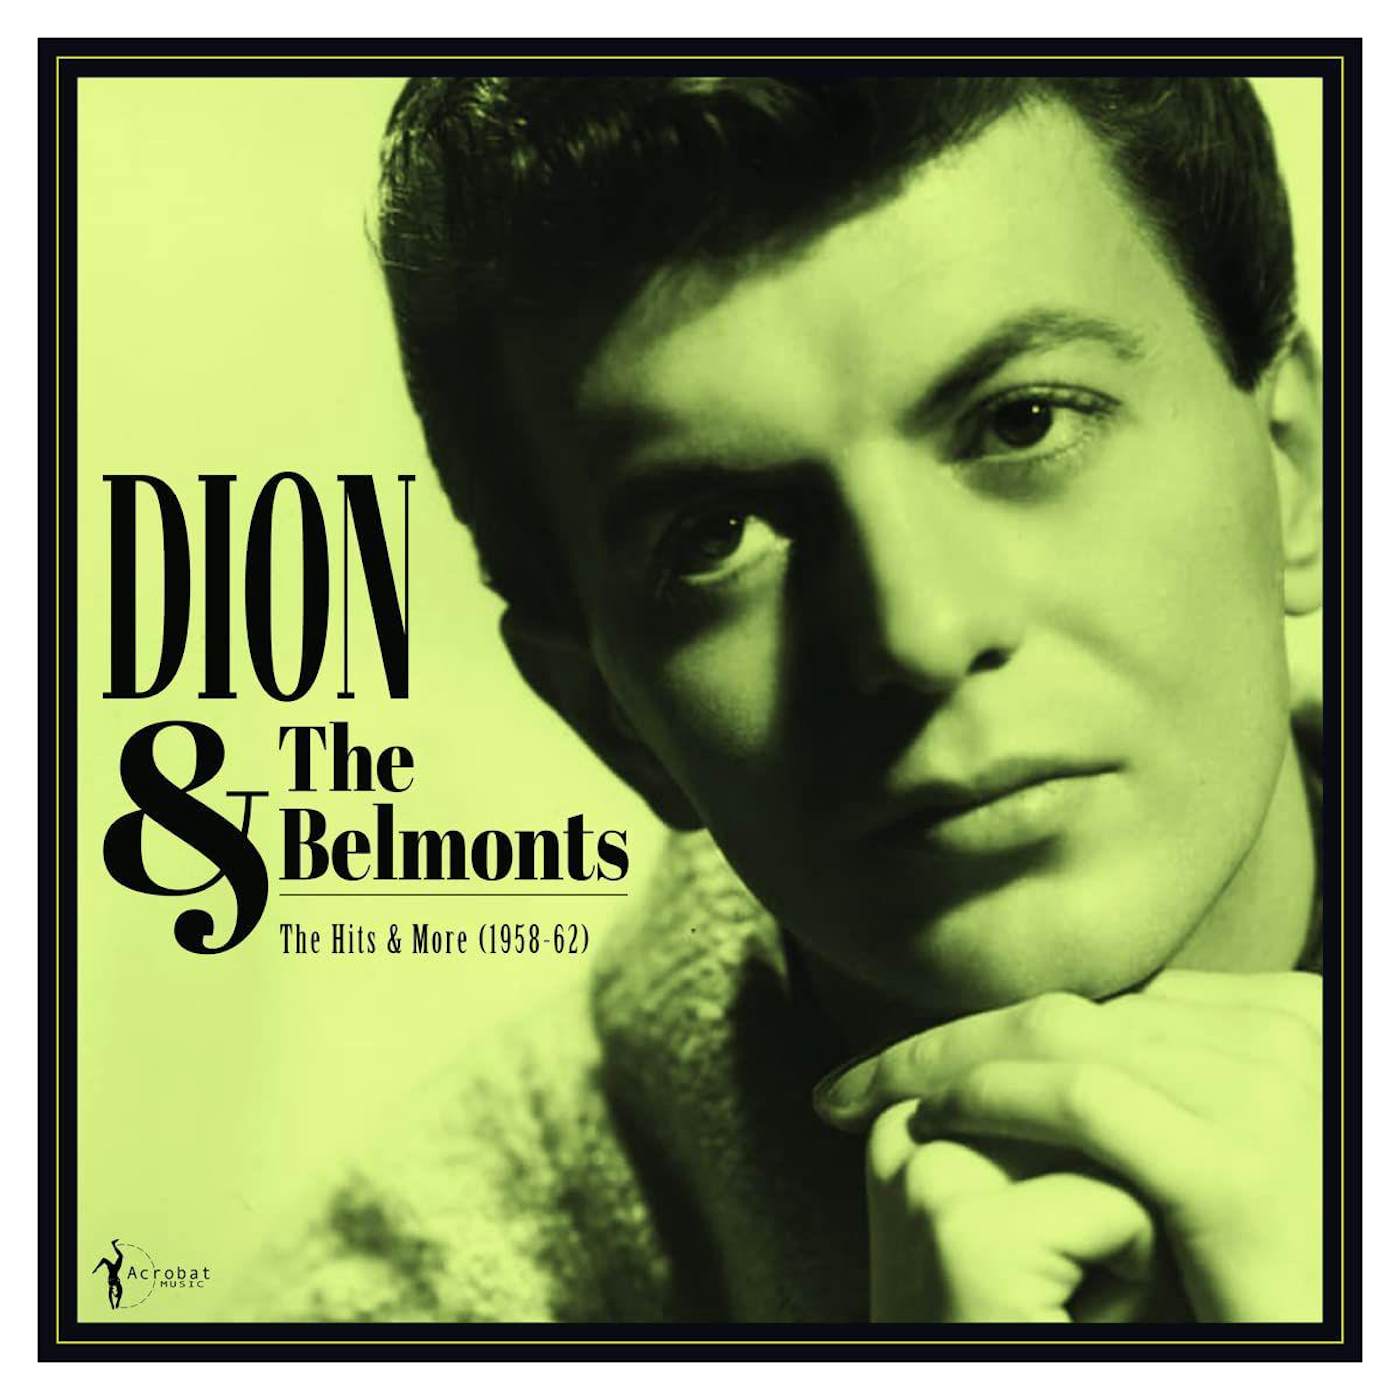 HITS & MORE: DION & THE BELMONTS 1958-62 Vinyl Record